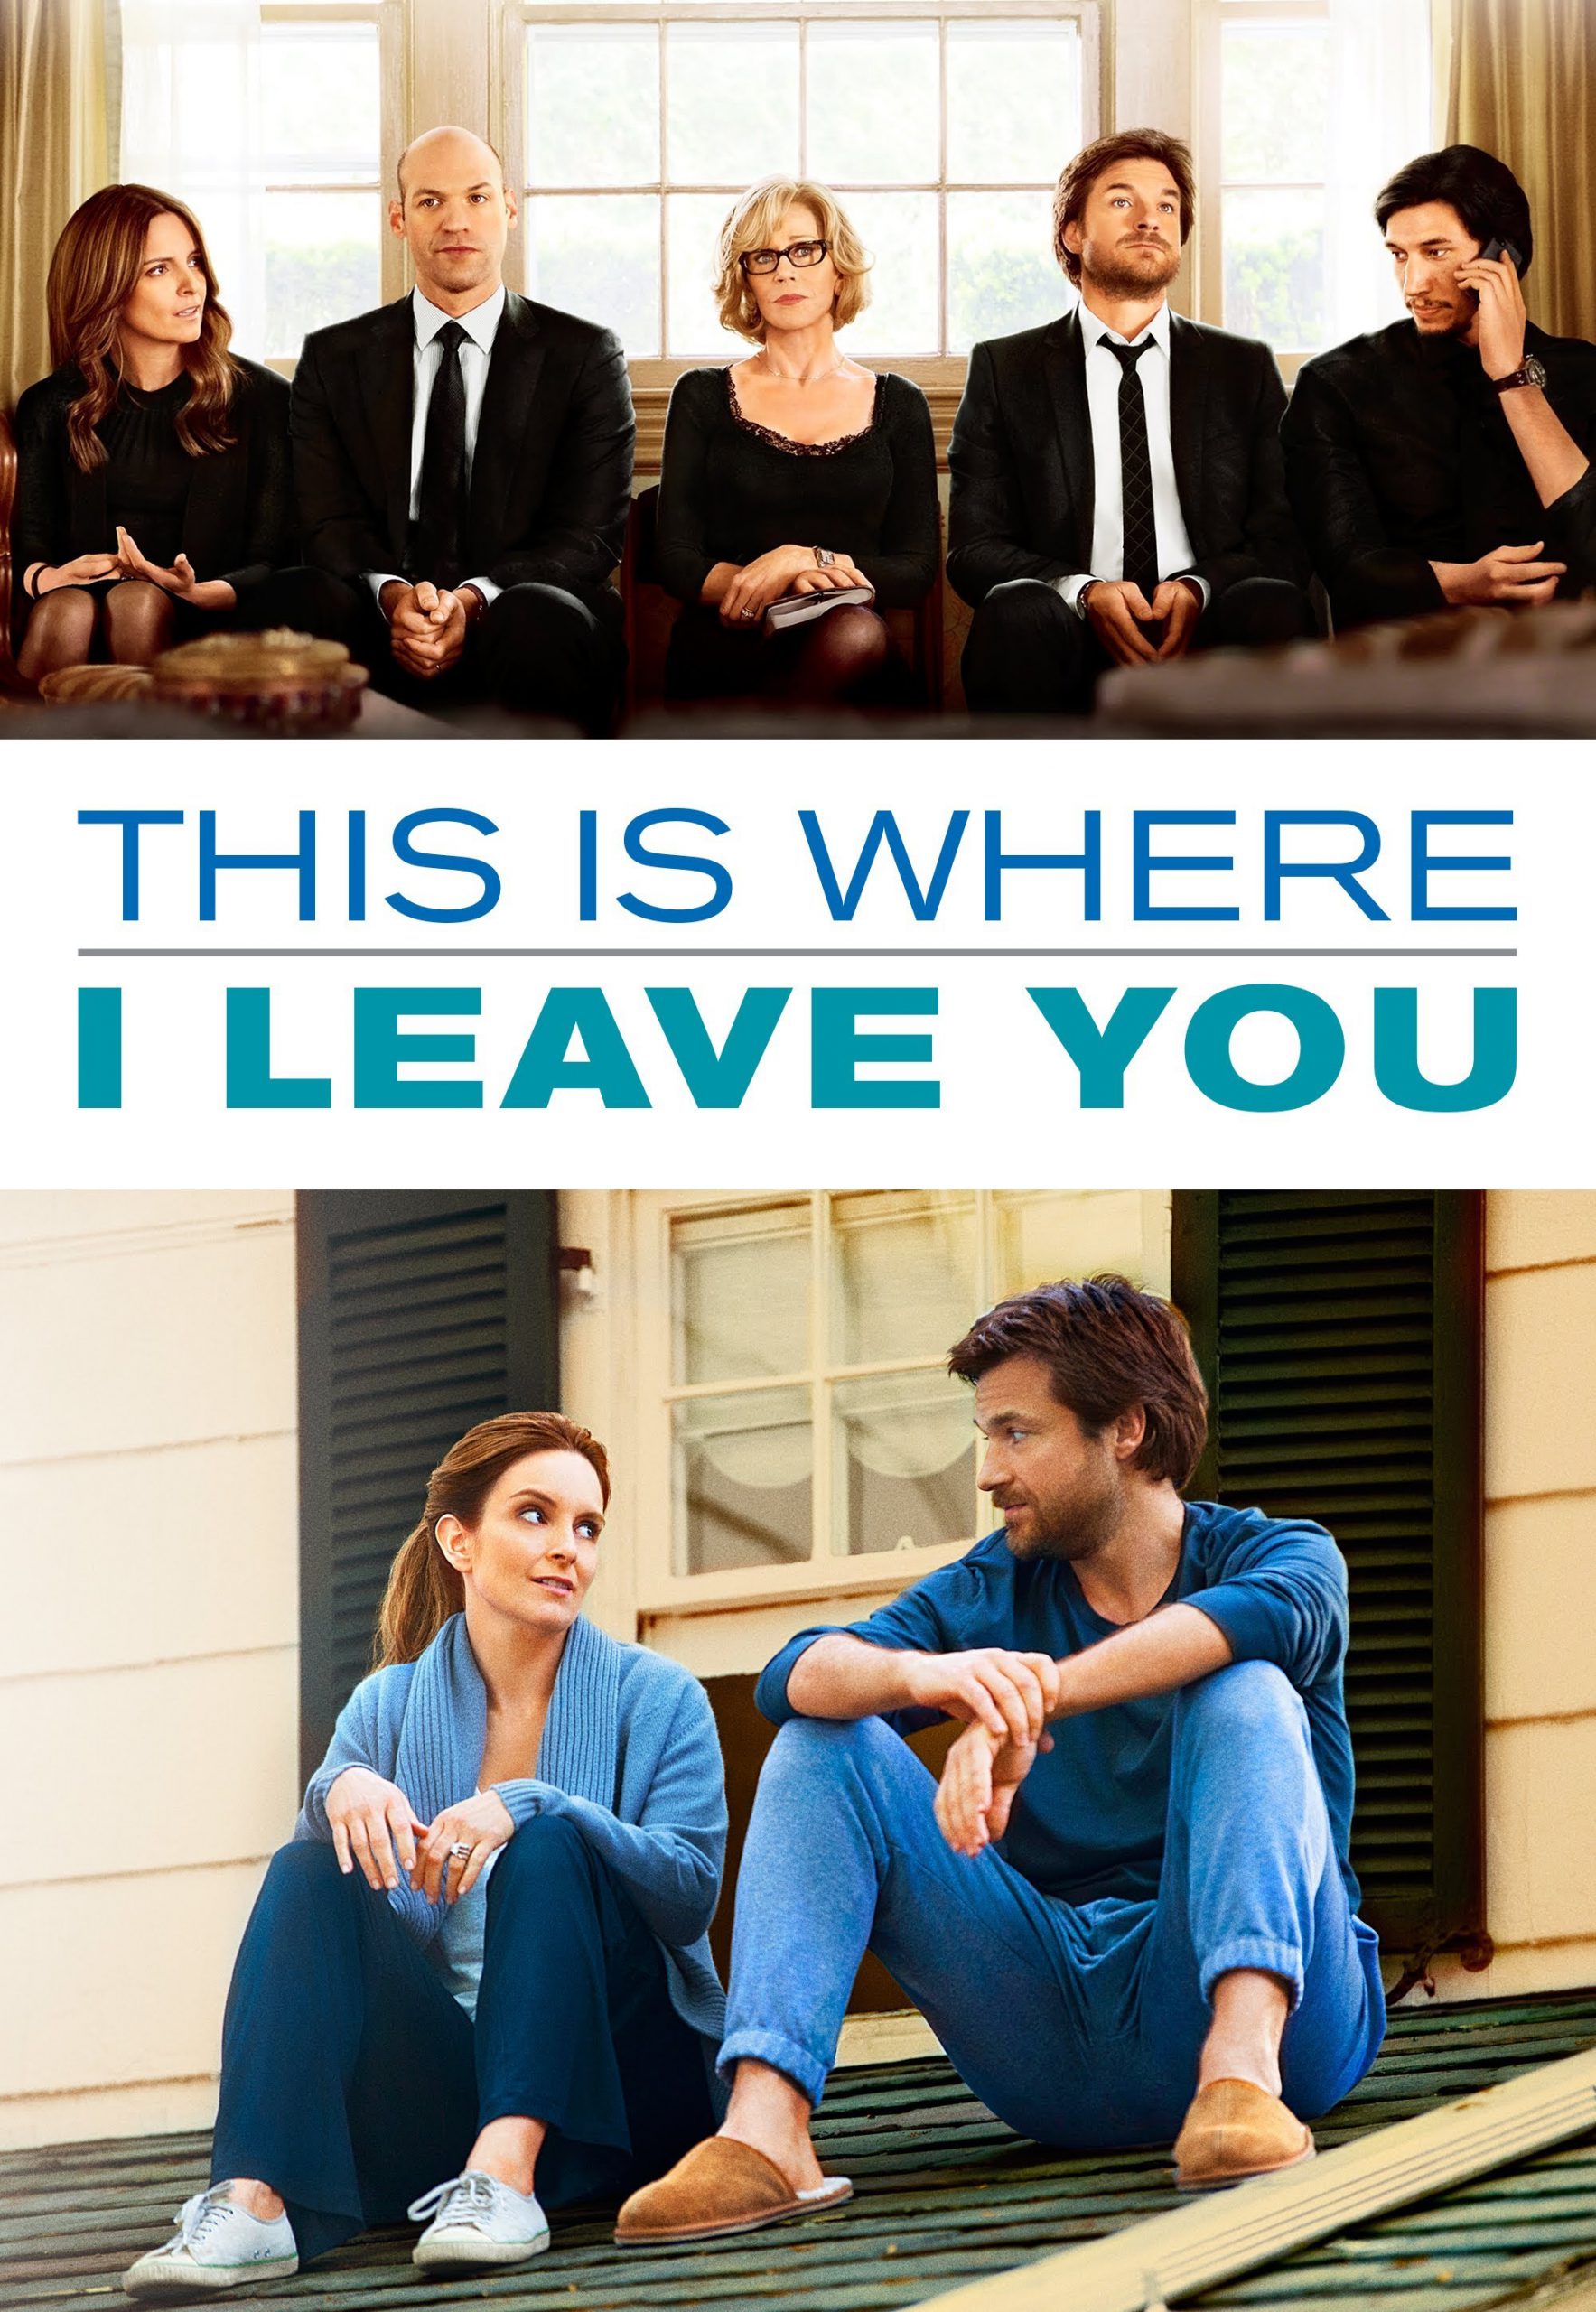 This is where i leave you [HD] (2014)